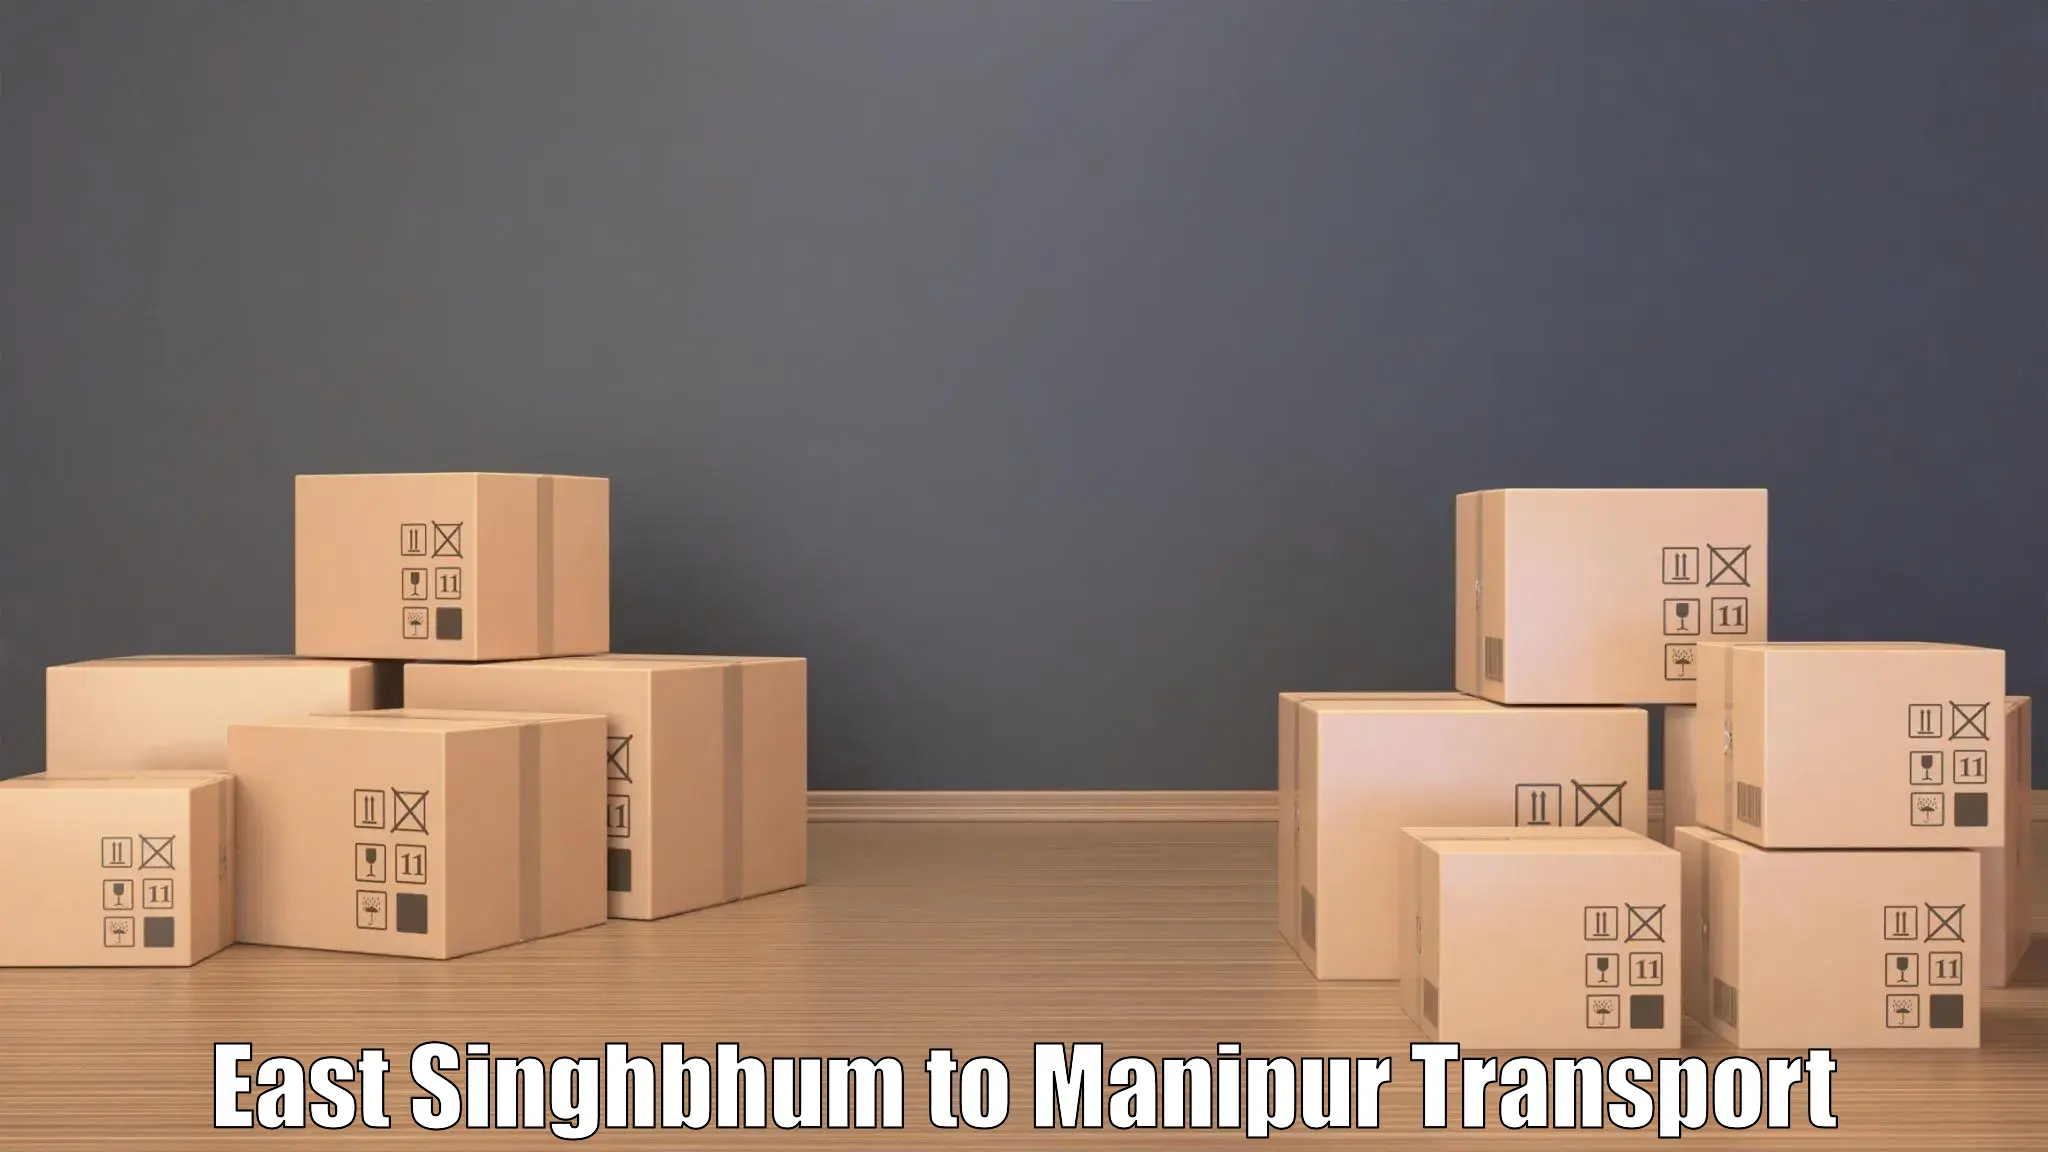 Daily transport service East Singhbhum to Manipur